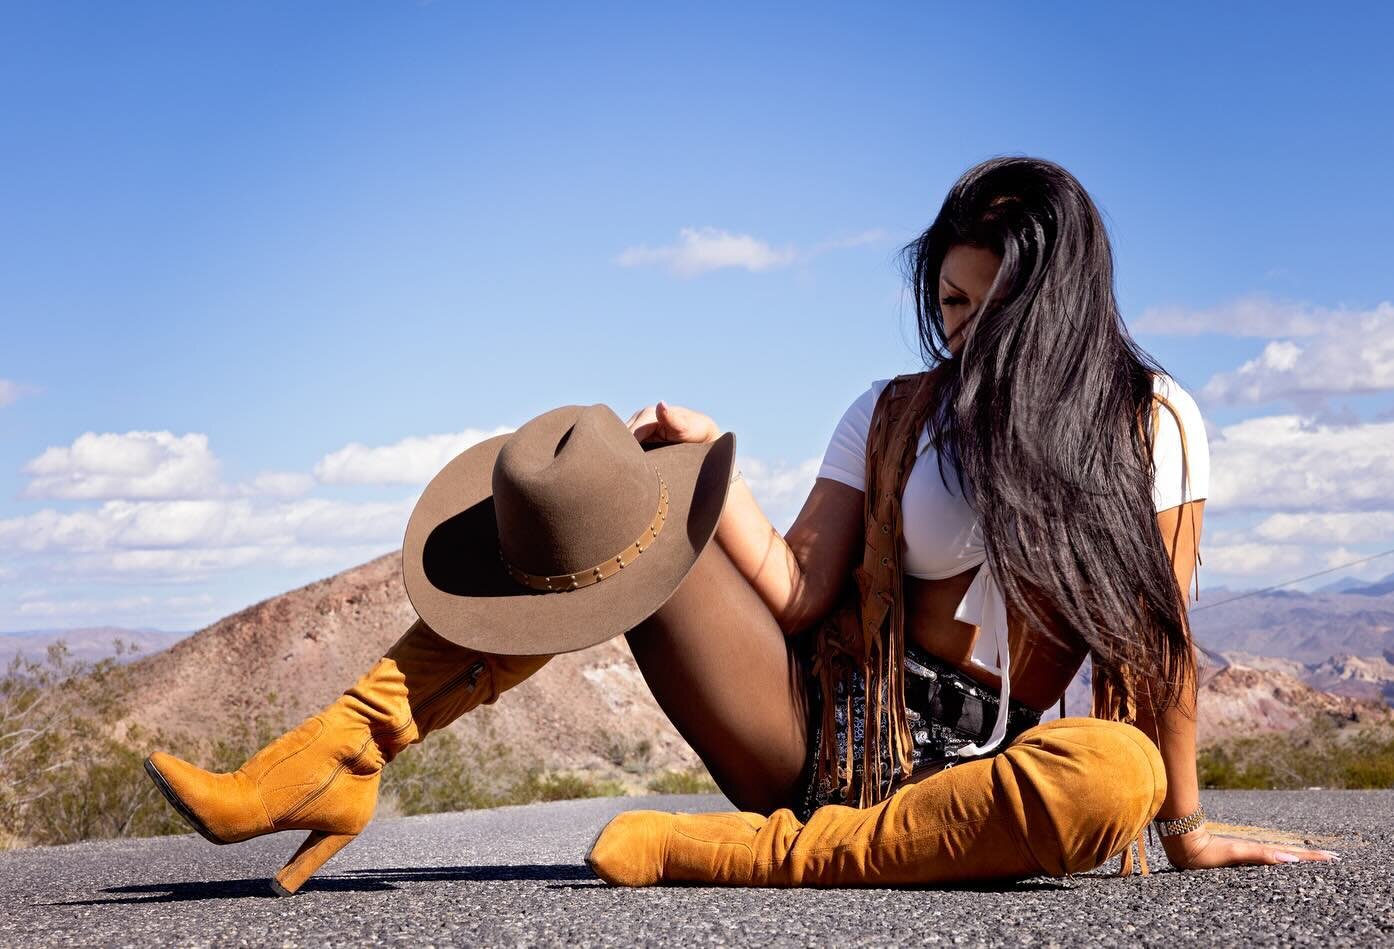 Keep your soul clean and your boots dirty!

#nelsonsghosttown #desert #photoshoot